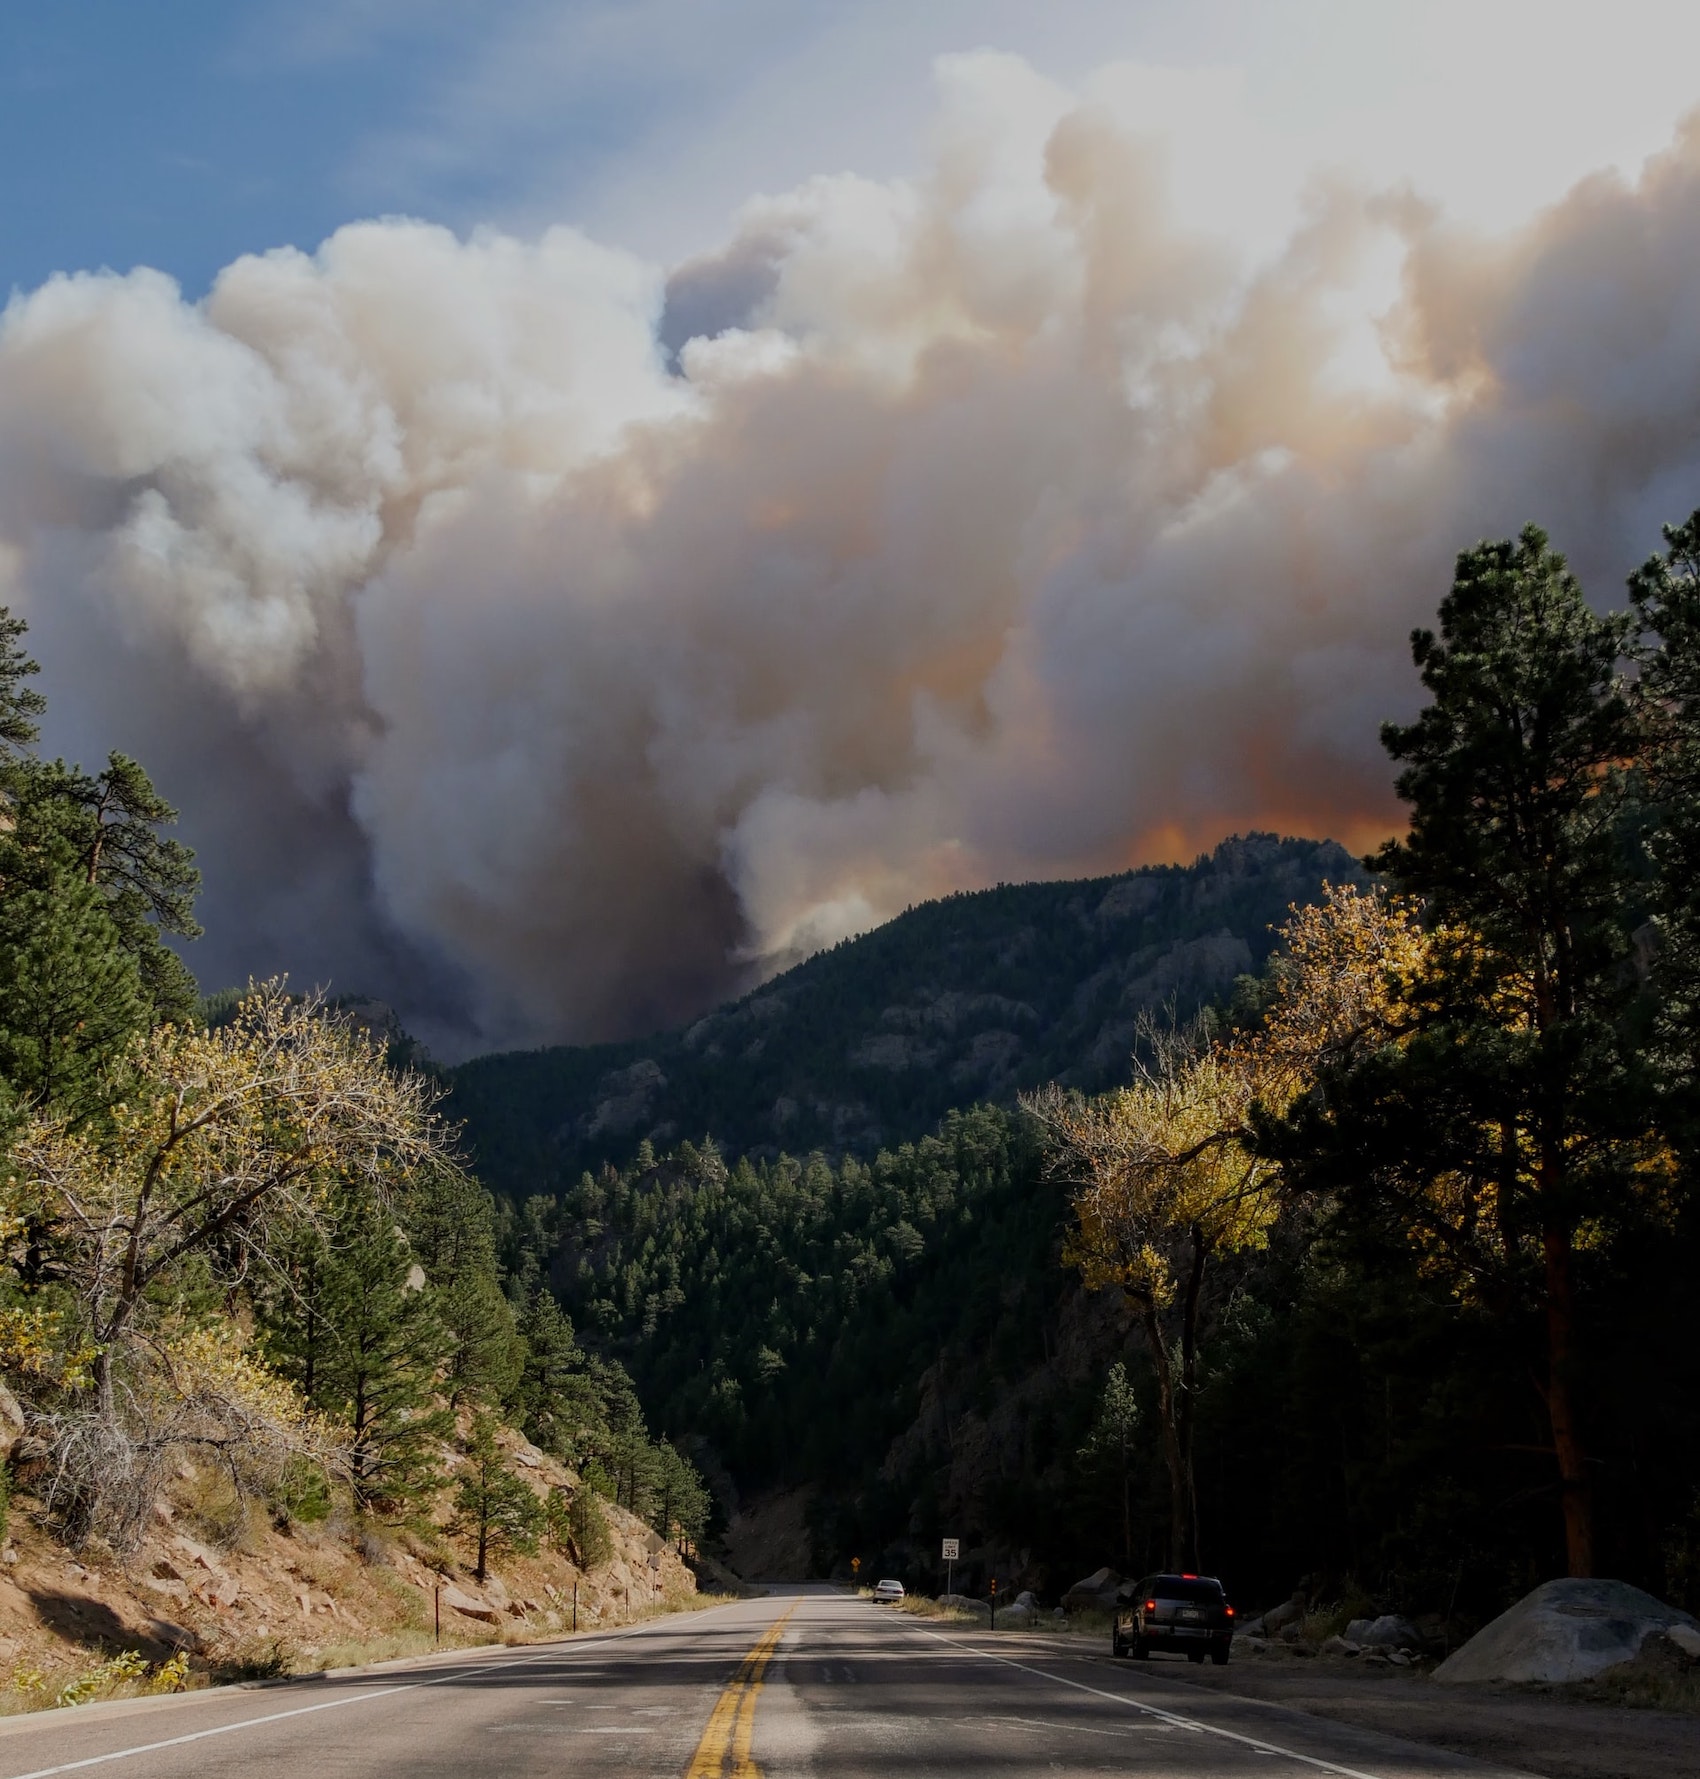 Here’s how the 2020 Western fire season got so extreme